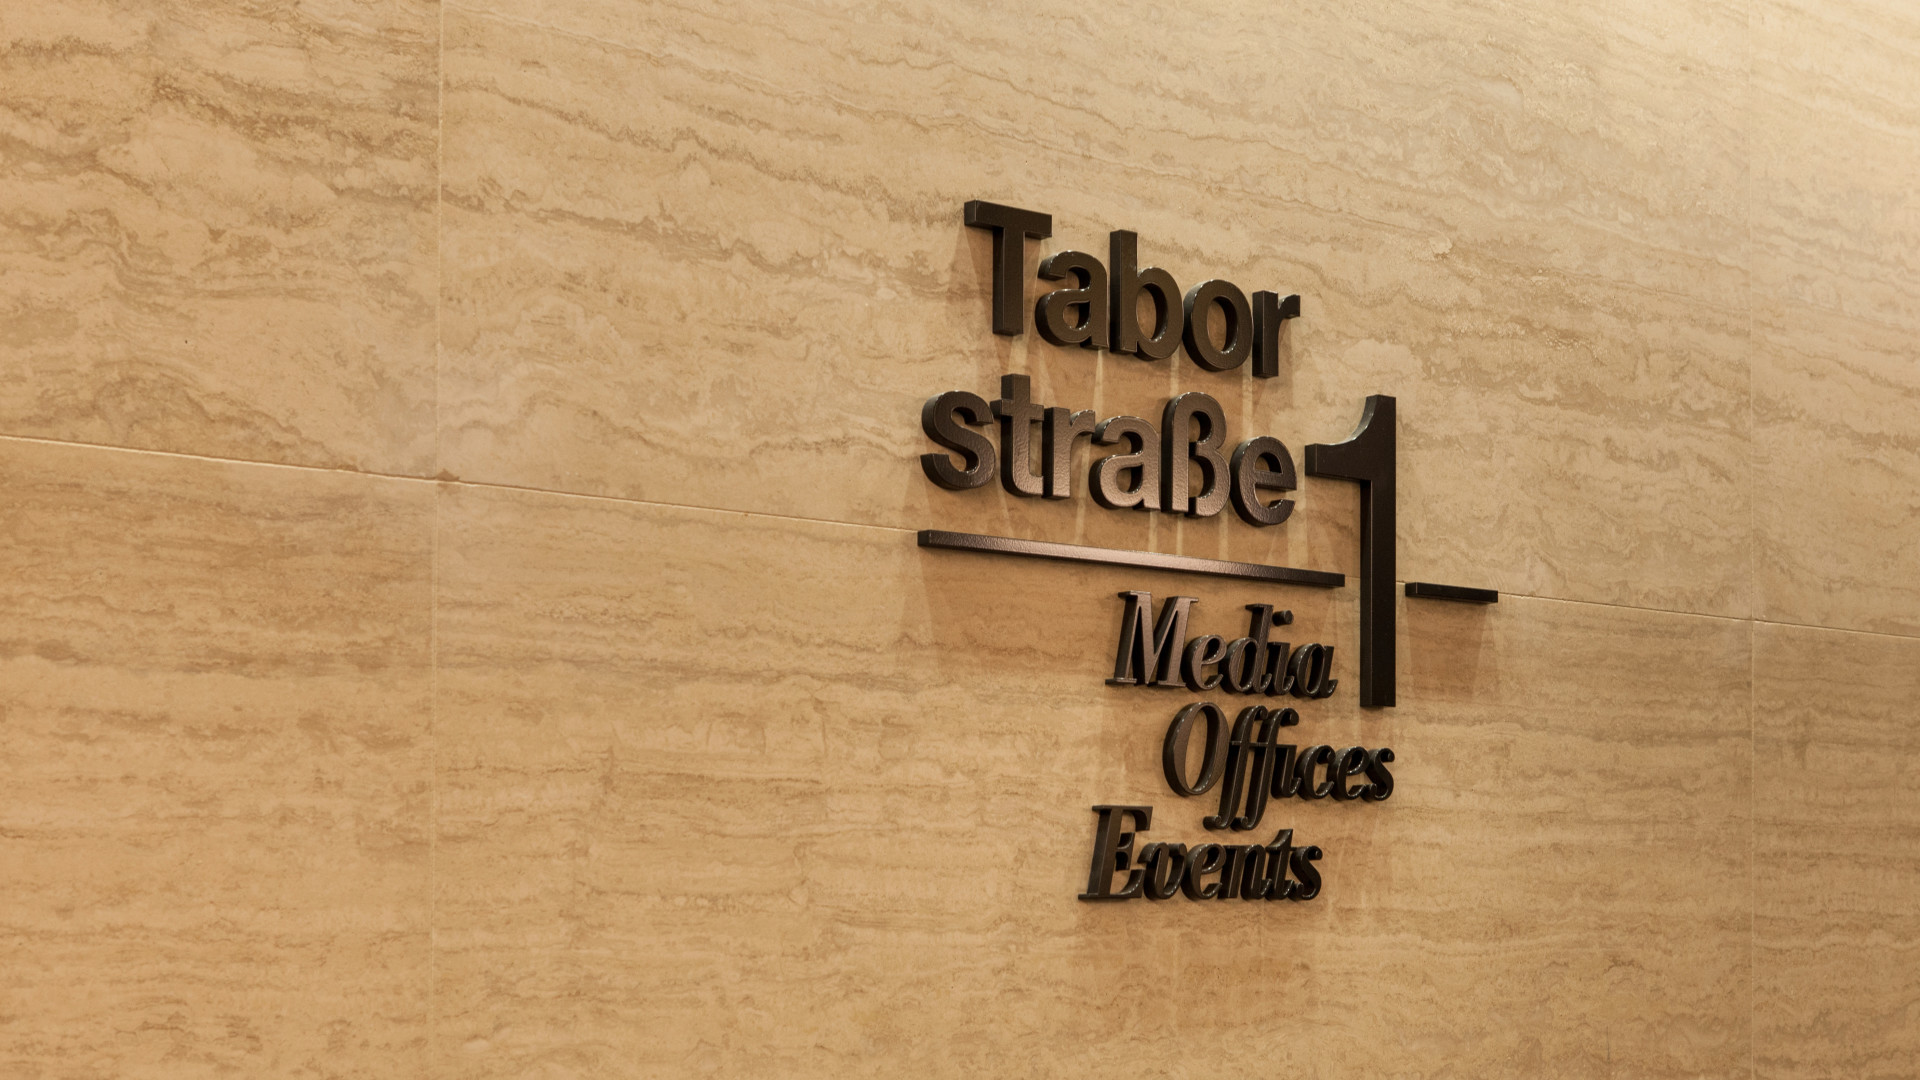 Logo mounted on marble wall - black lettering with dividing line: Taborstraße 1, Media, Offices, Events